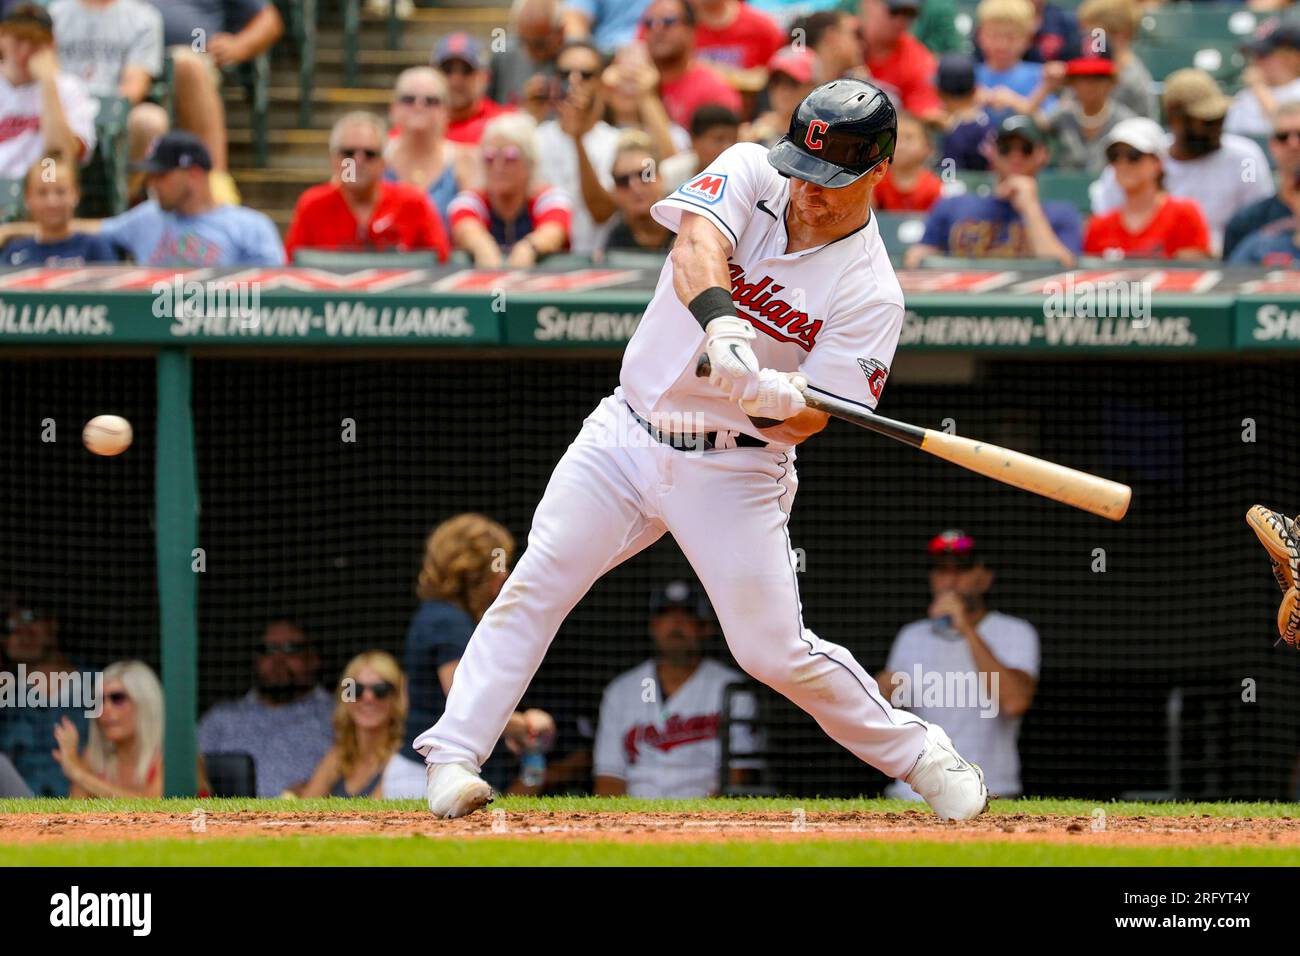 CLEVELAND, OH - AUGUST 06: Cleveland Guardians first baseman Kole Calhoun  (56) doubles during the fifth inning of the Major League Baseball game  between the Chicago White Sox and Cleveland Guardians on